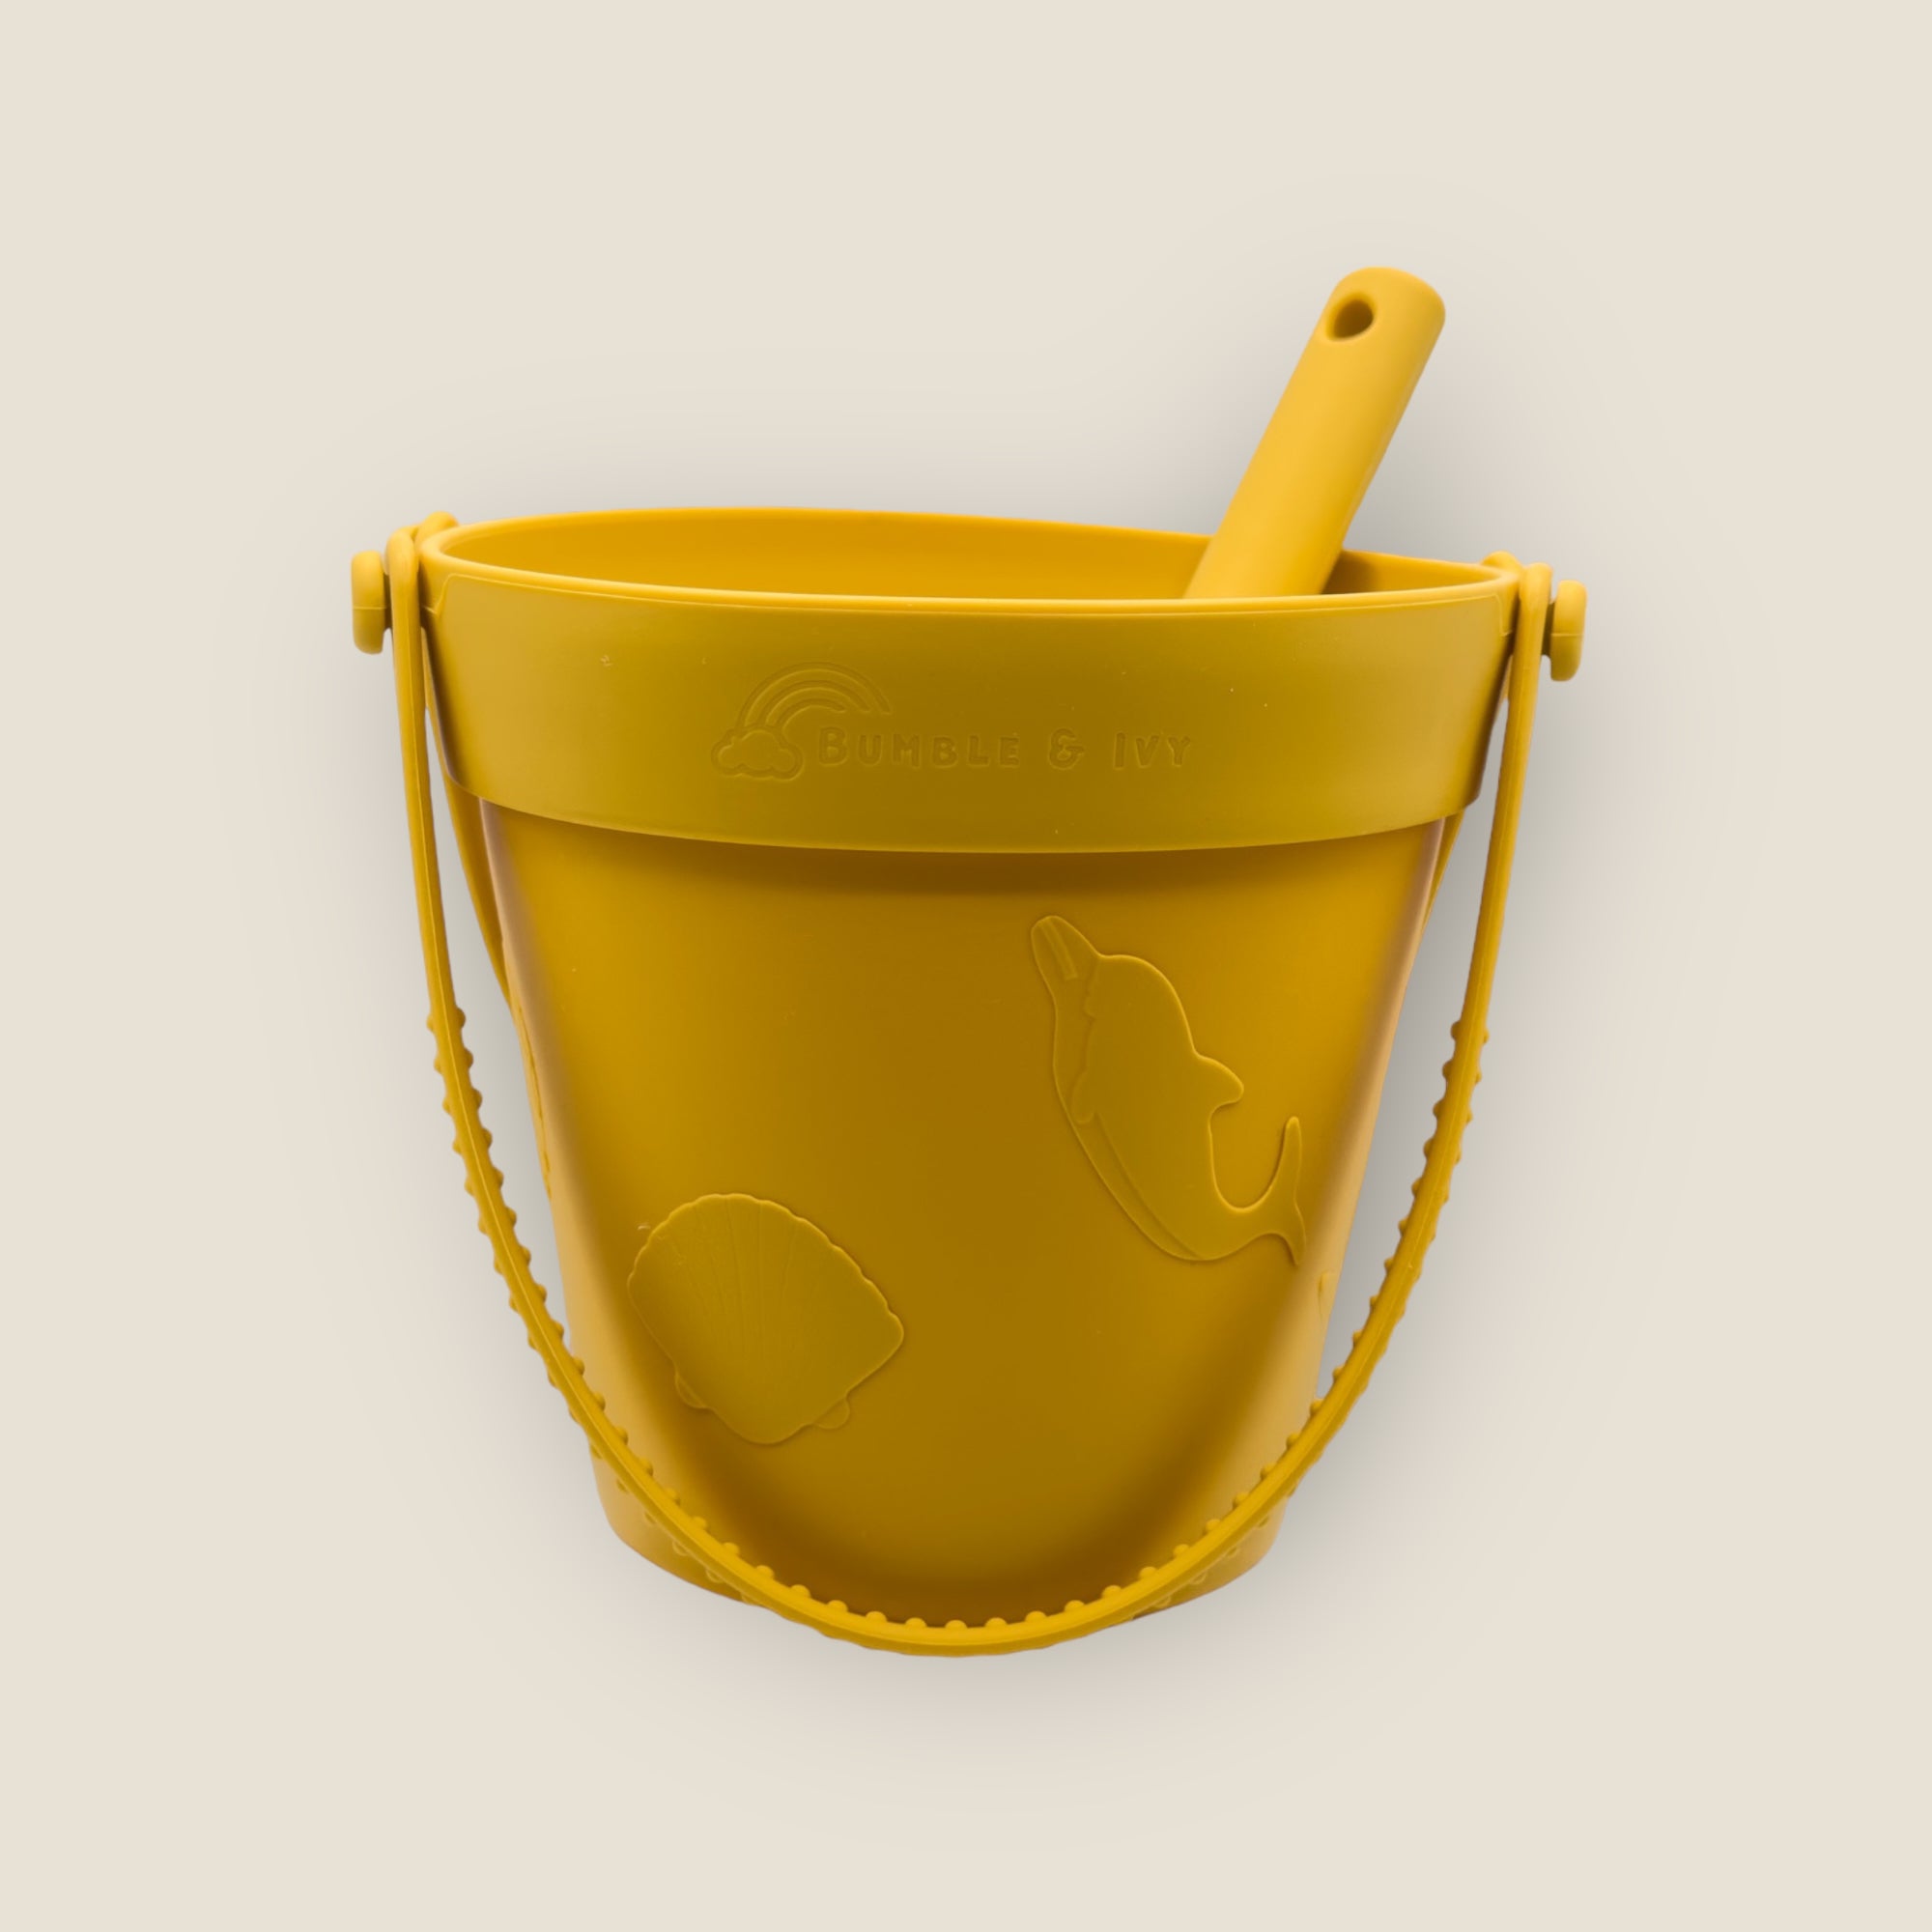 Bucket and Spade - Pirate gold